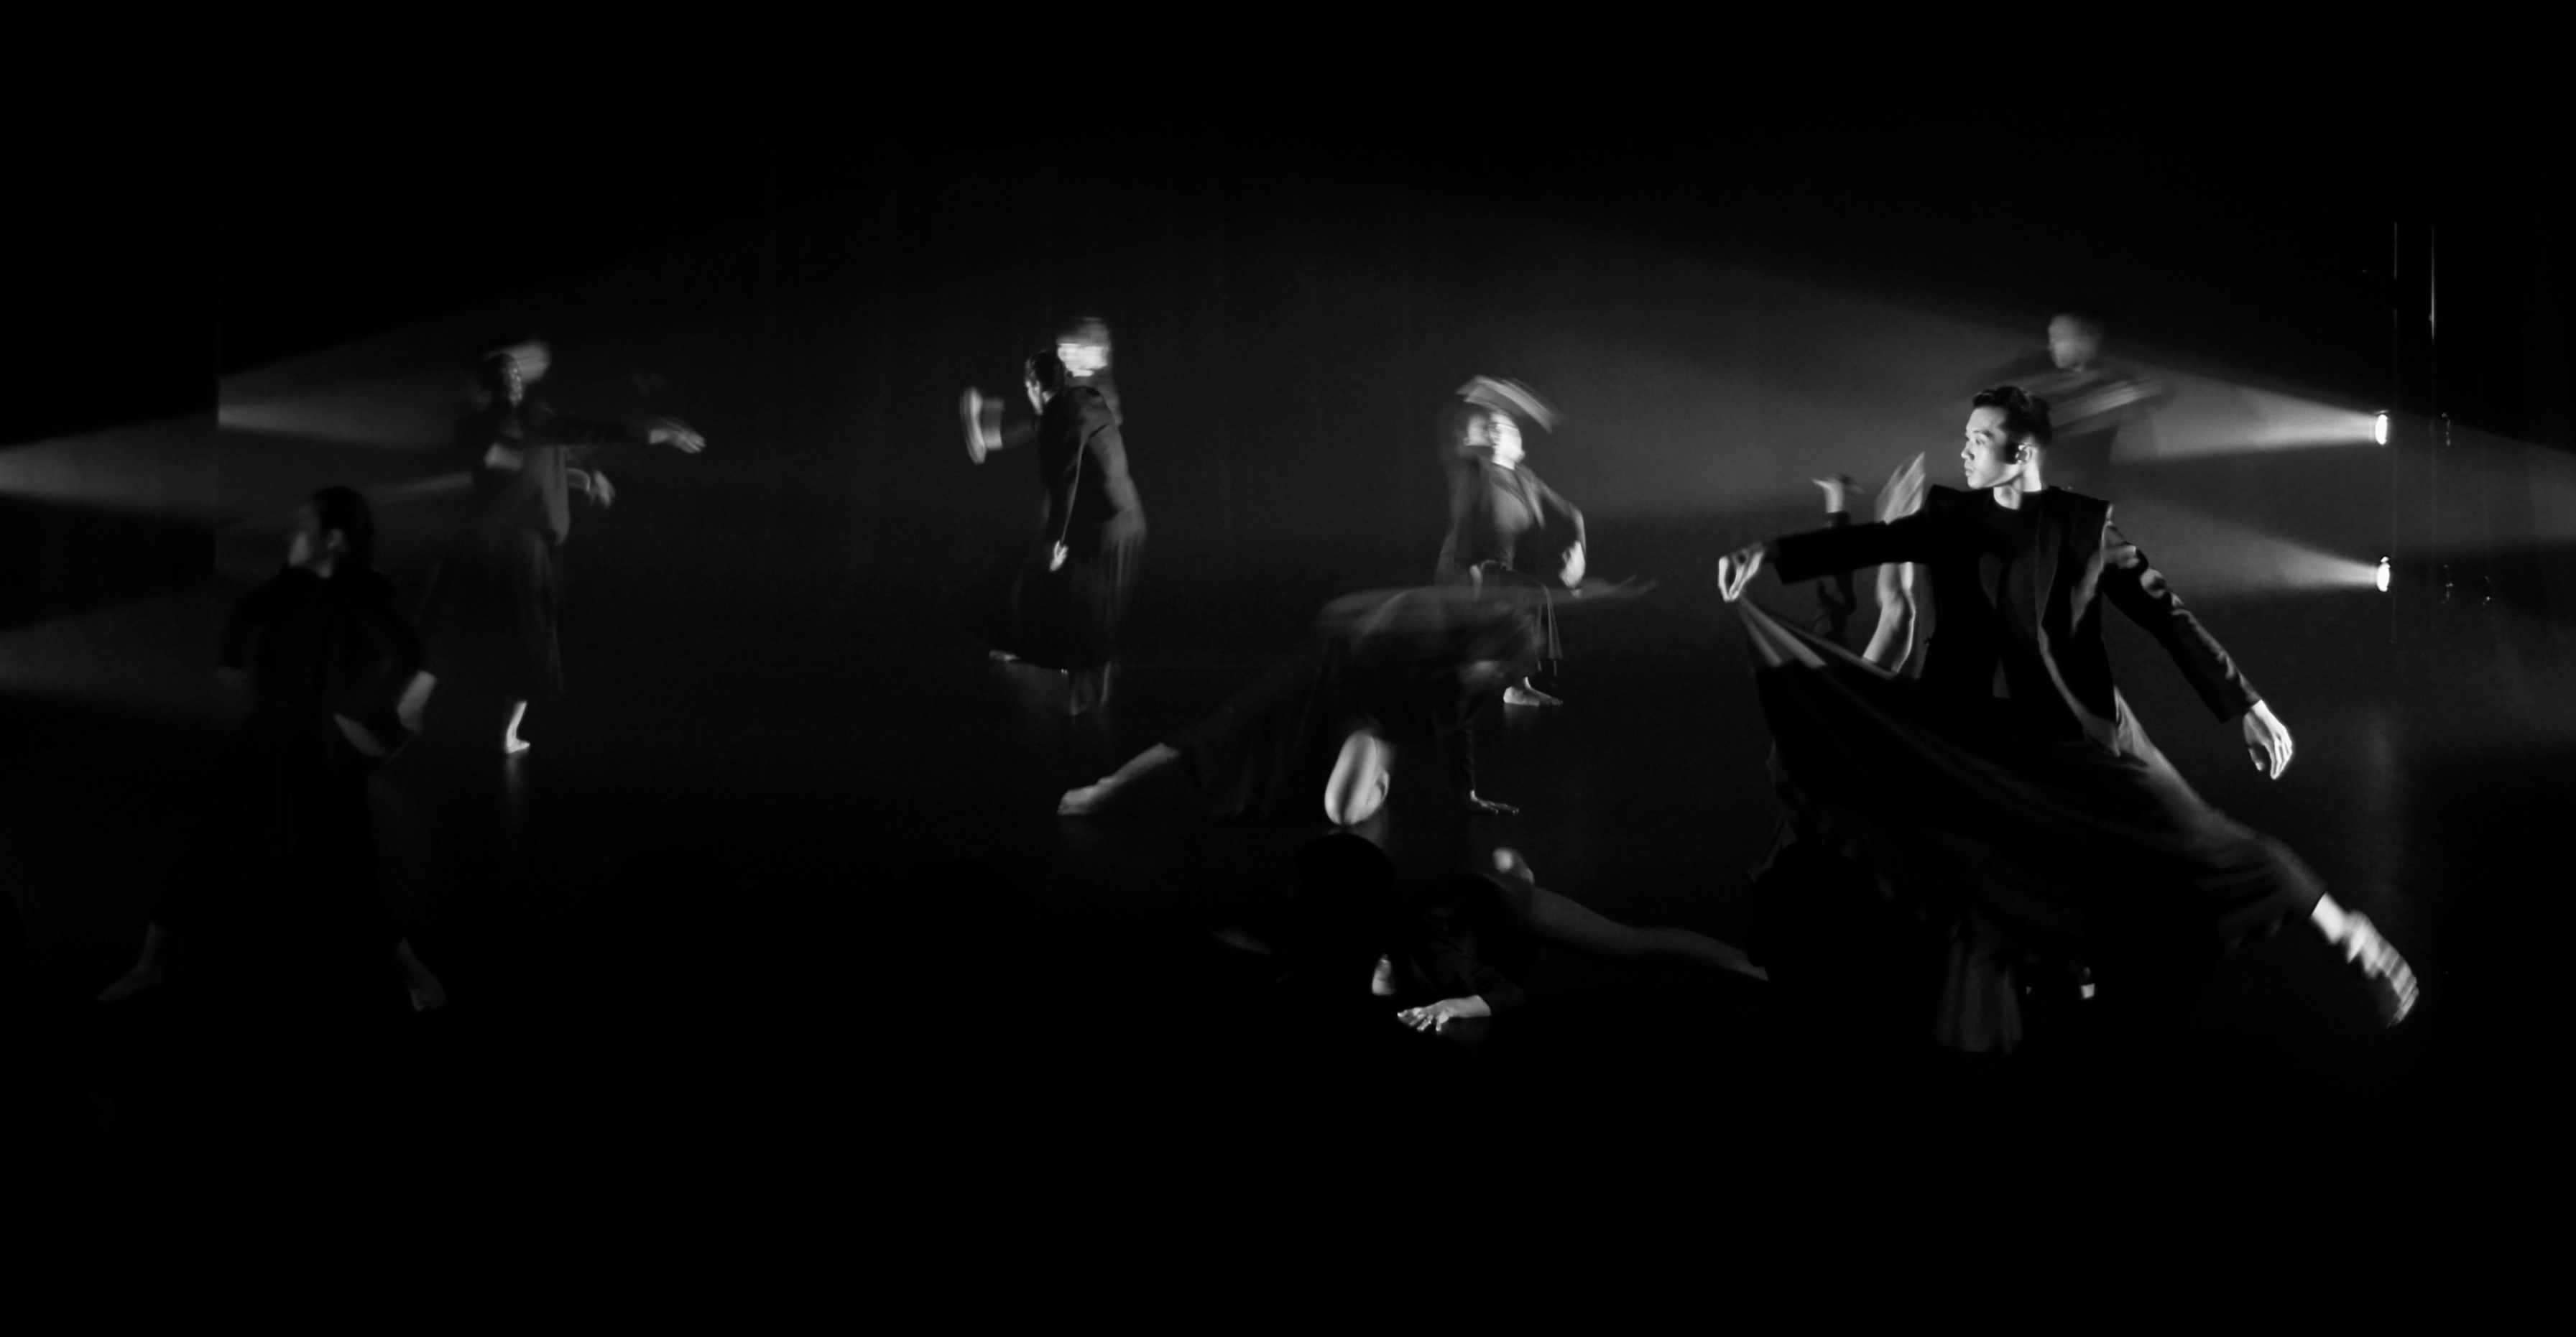 Black and white blurred shot of dancers in motion on stage with side lighting